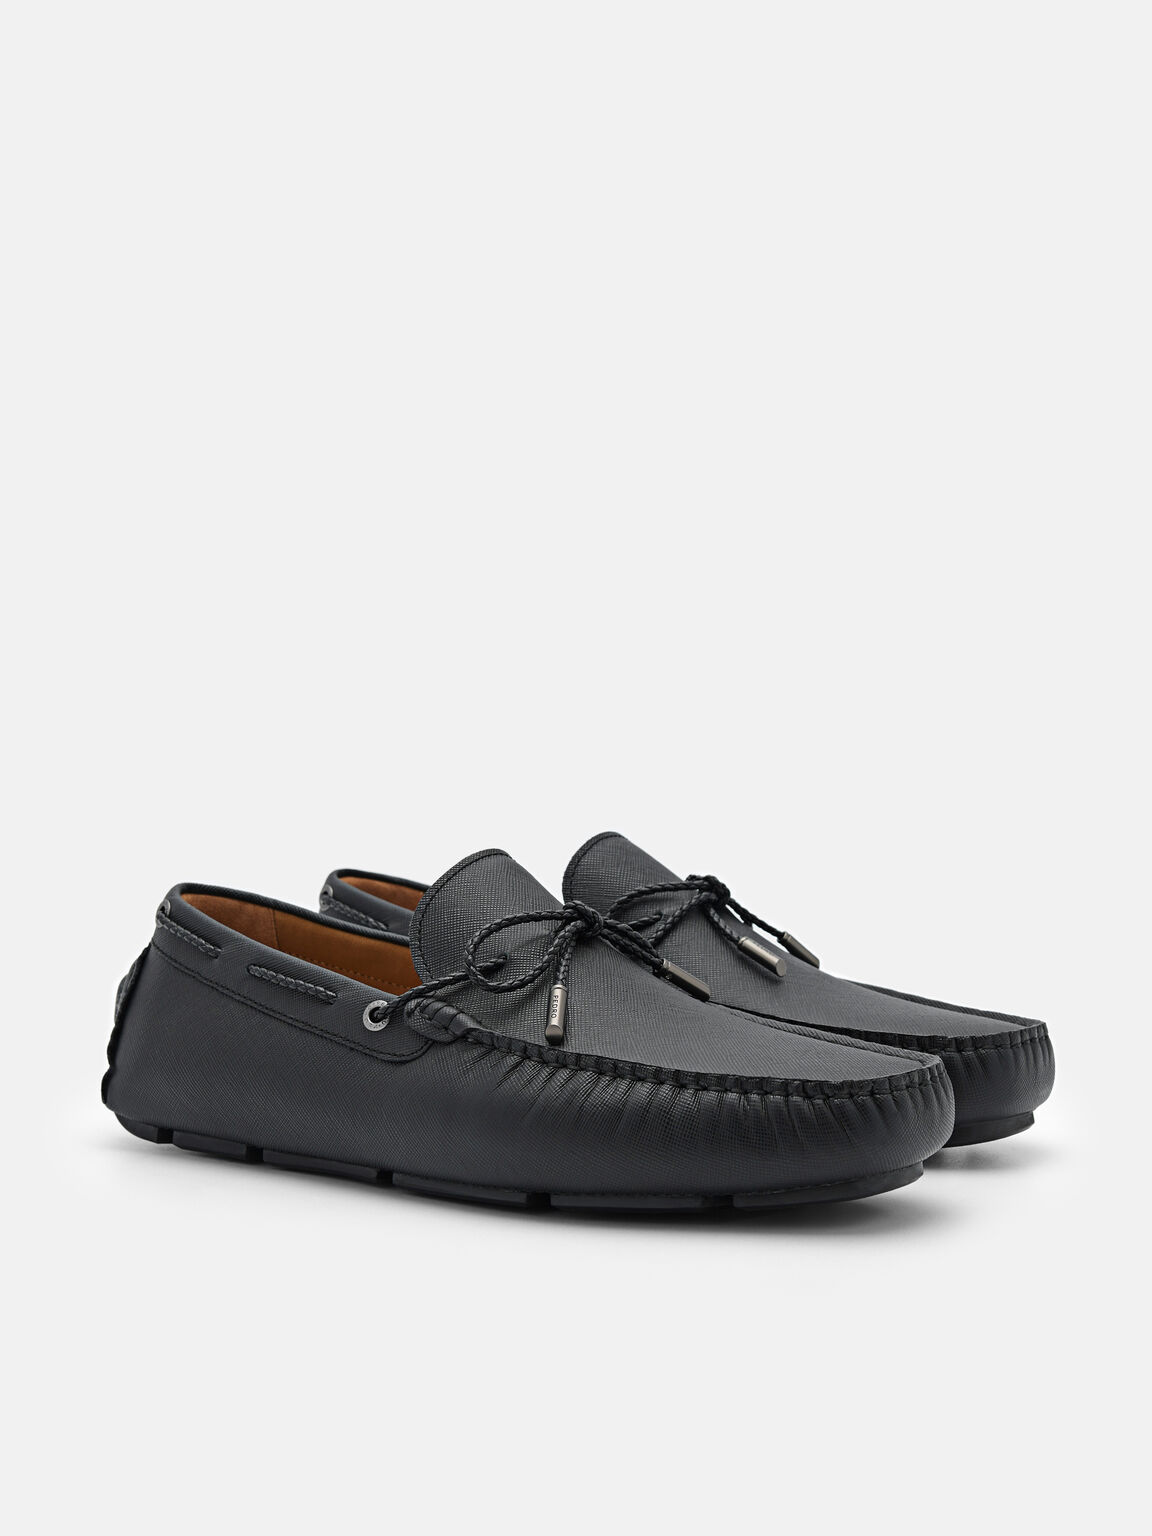 Leather Bow Moccasins, Black